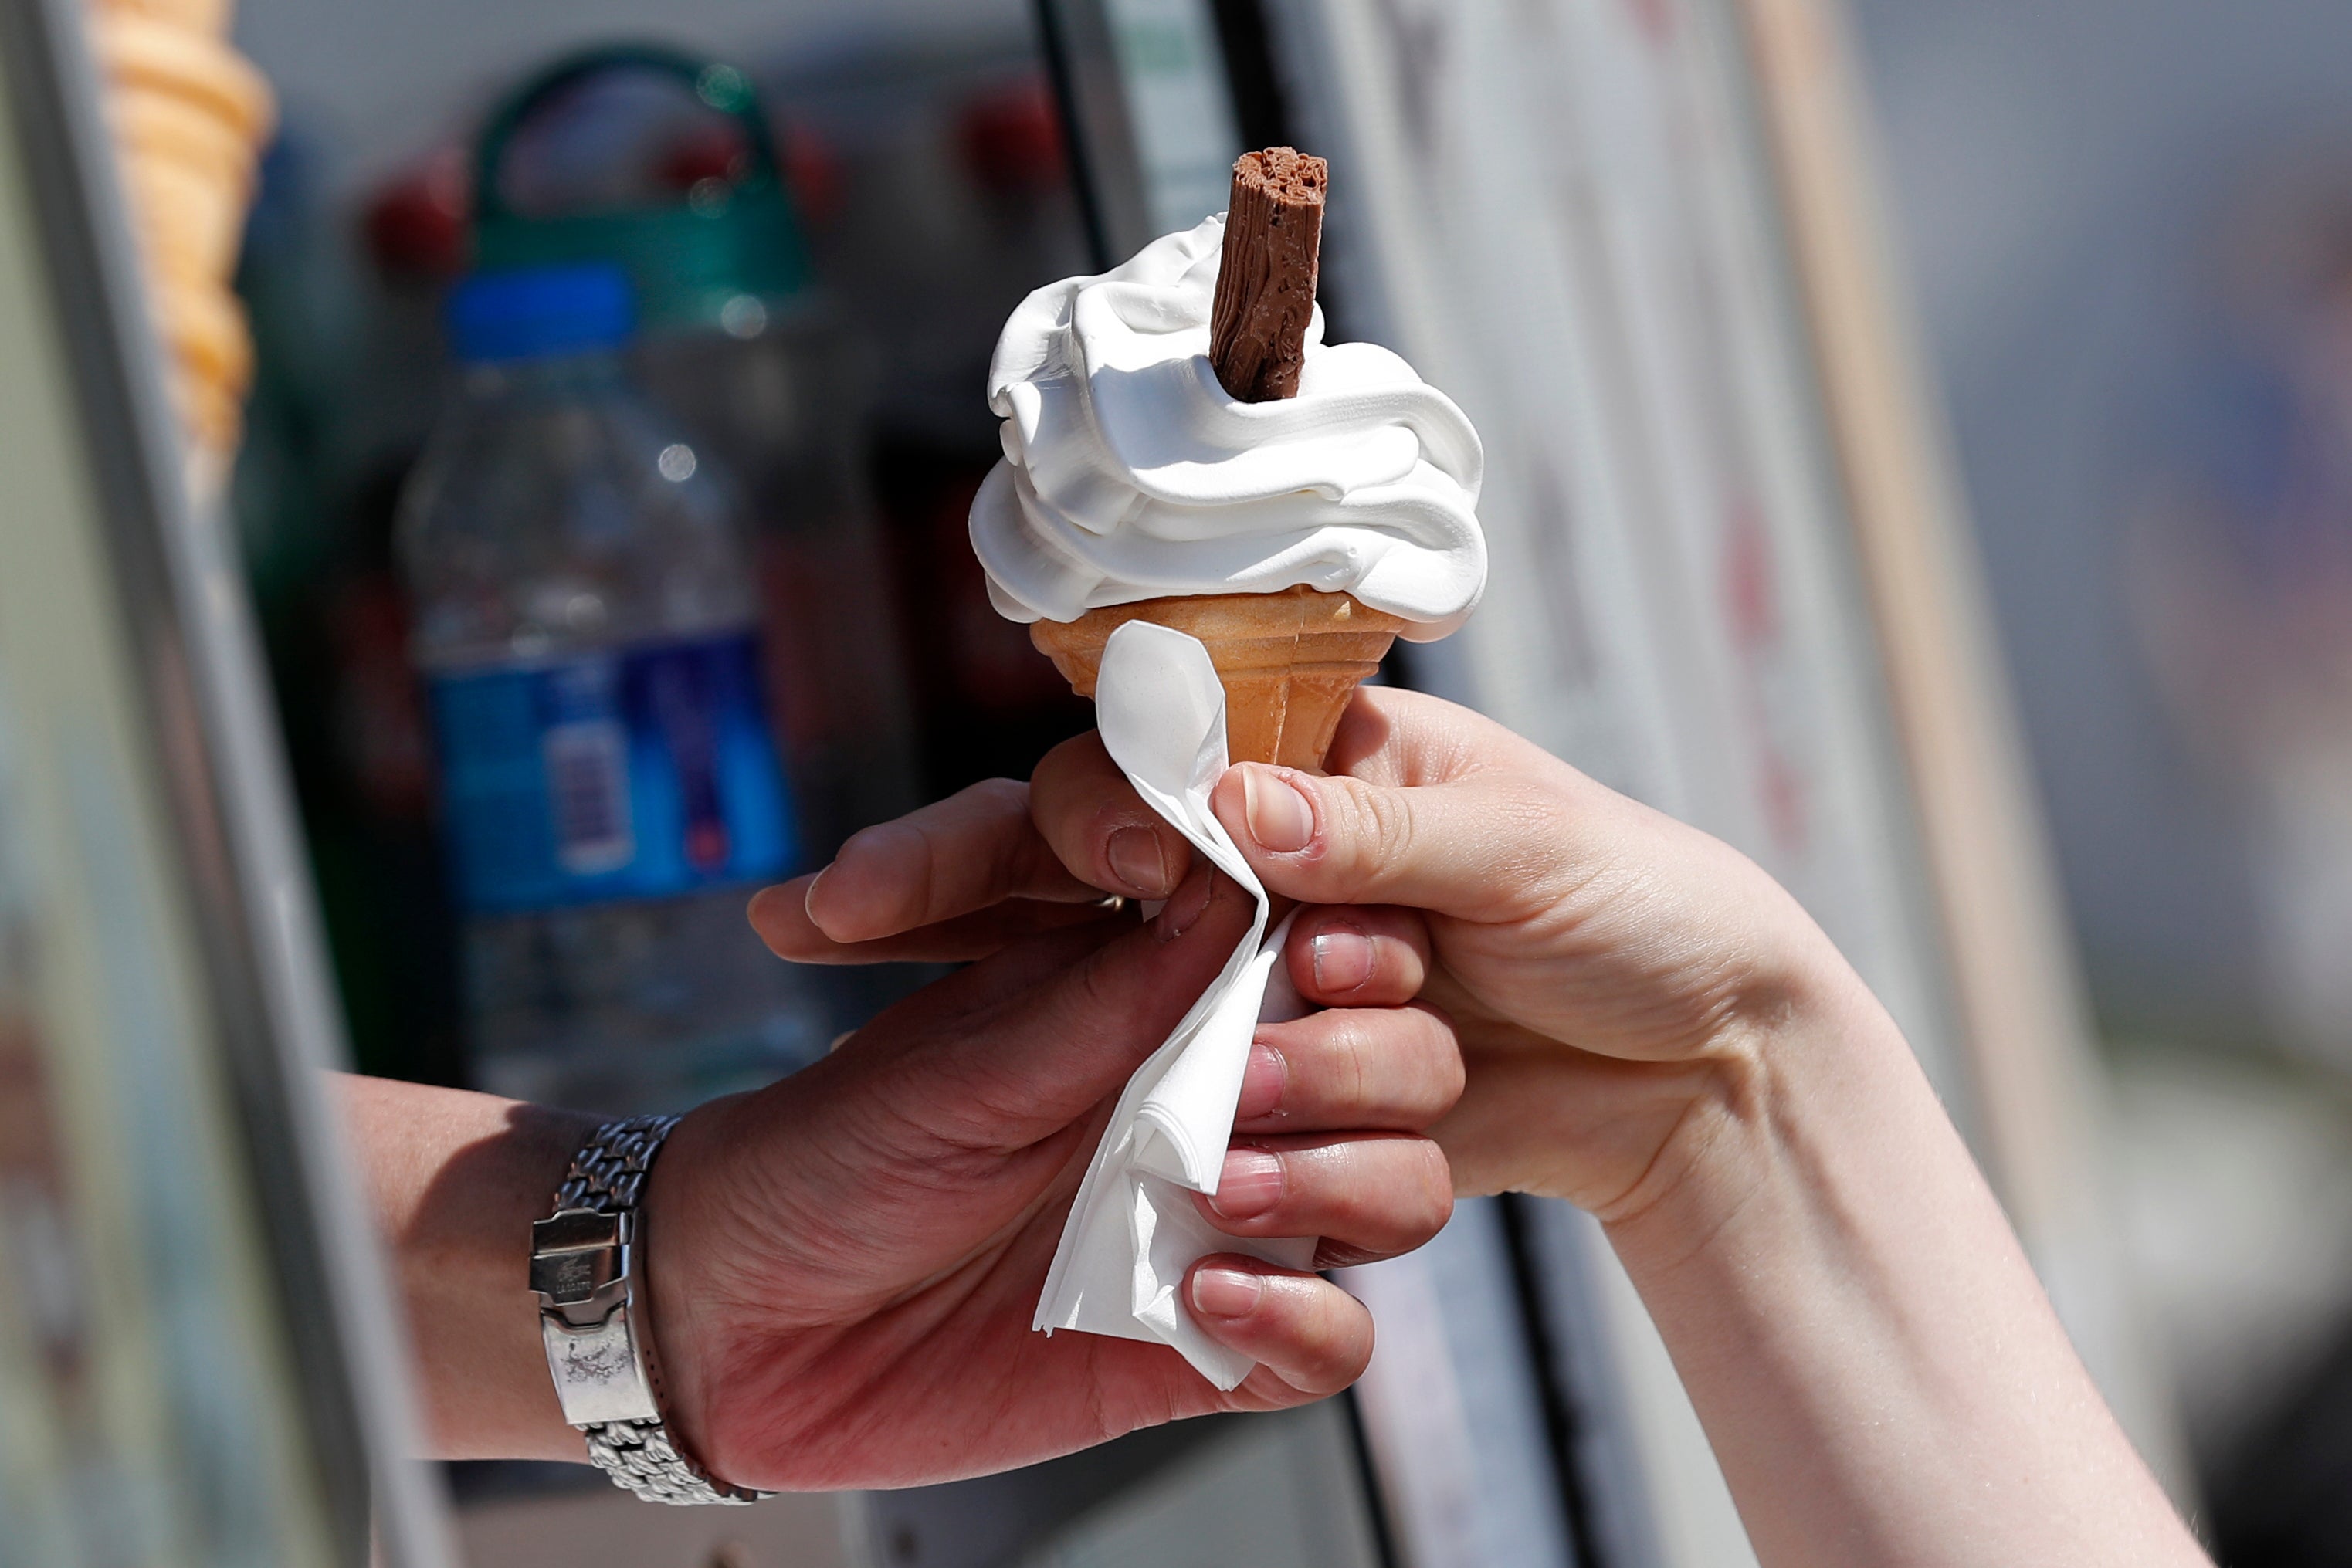 ice cream samples tests positive for coronavirus in China | The Independent